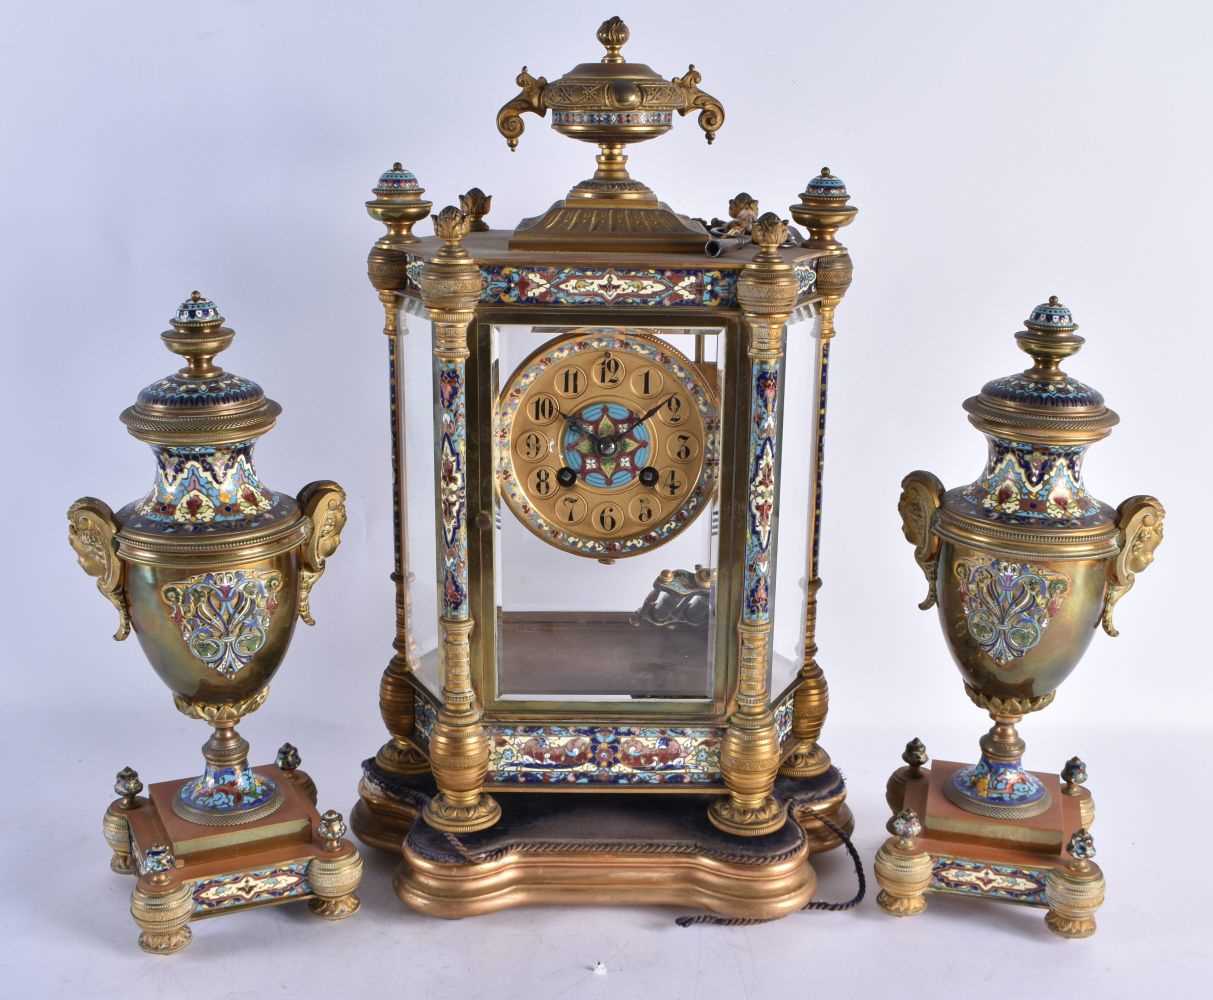 A LARGE LATE 19TH CENTURY FRENCH BRONZE AND CHAMPLEVE ENAMEL CLOCK GARNITURE decorated with foliage.